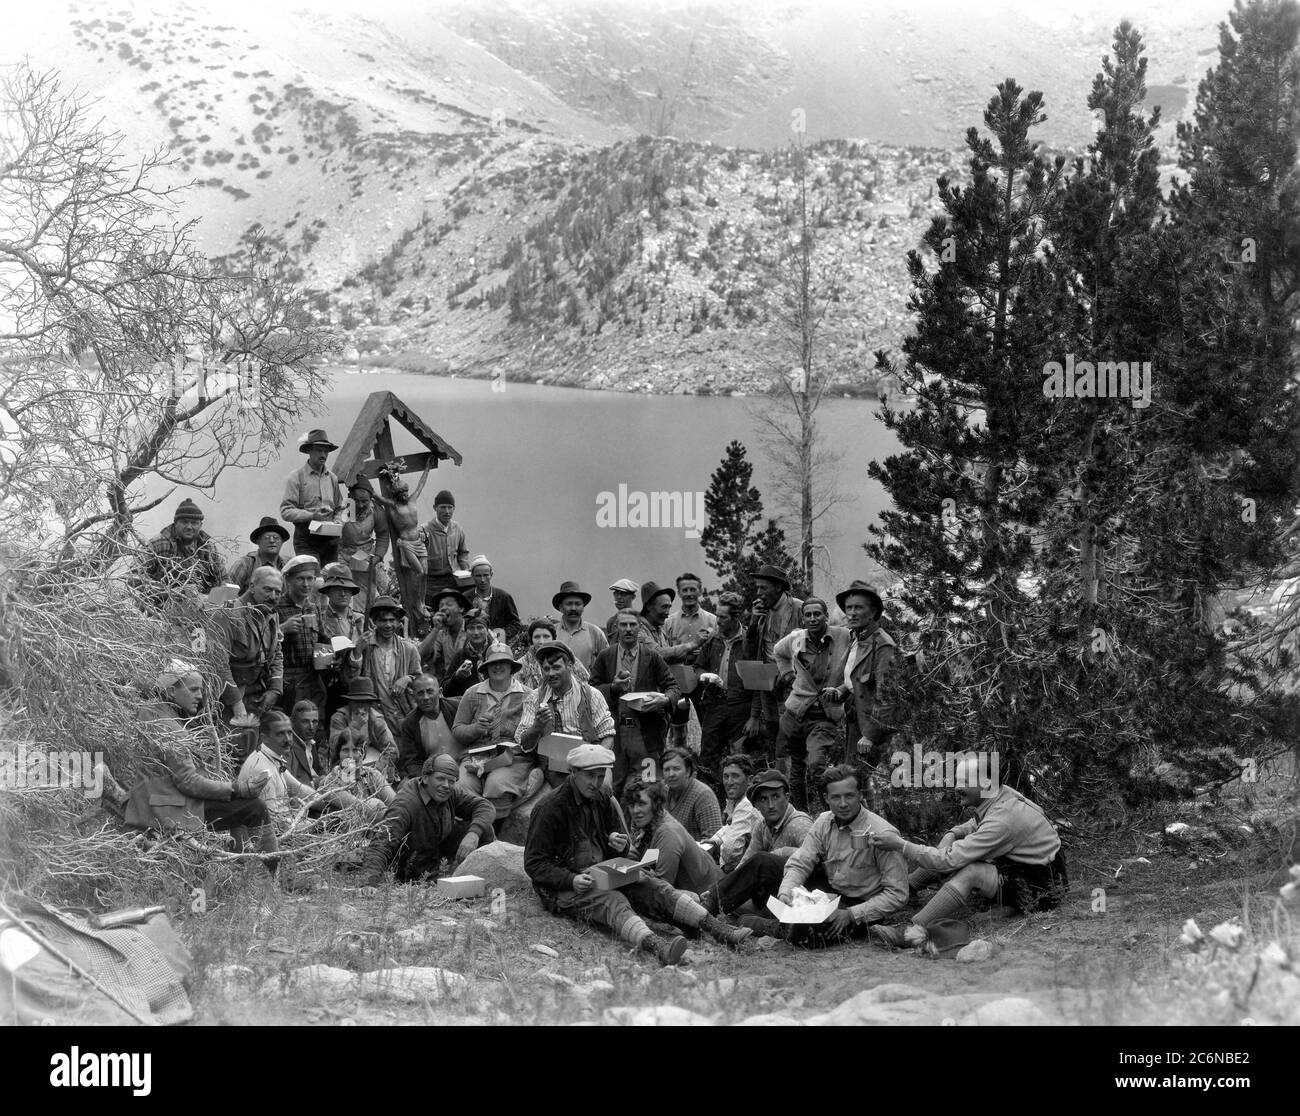 ERICH von STOHEIM his wife VALERIE GERMONPREZ actors and film crew on set location lunch break candid Mount Whitney California during filming of THE HONEYMOON (released outside US in 1930) second part of THE WEDDING MARCH 1928 director ERICH von STROHEIM writers Harry Carr and Erich von Stroheim Silent movie with musical score and sound effects Paramount Famous Lasky Corporation Stock Photo